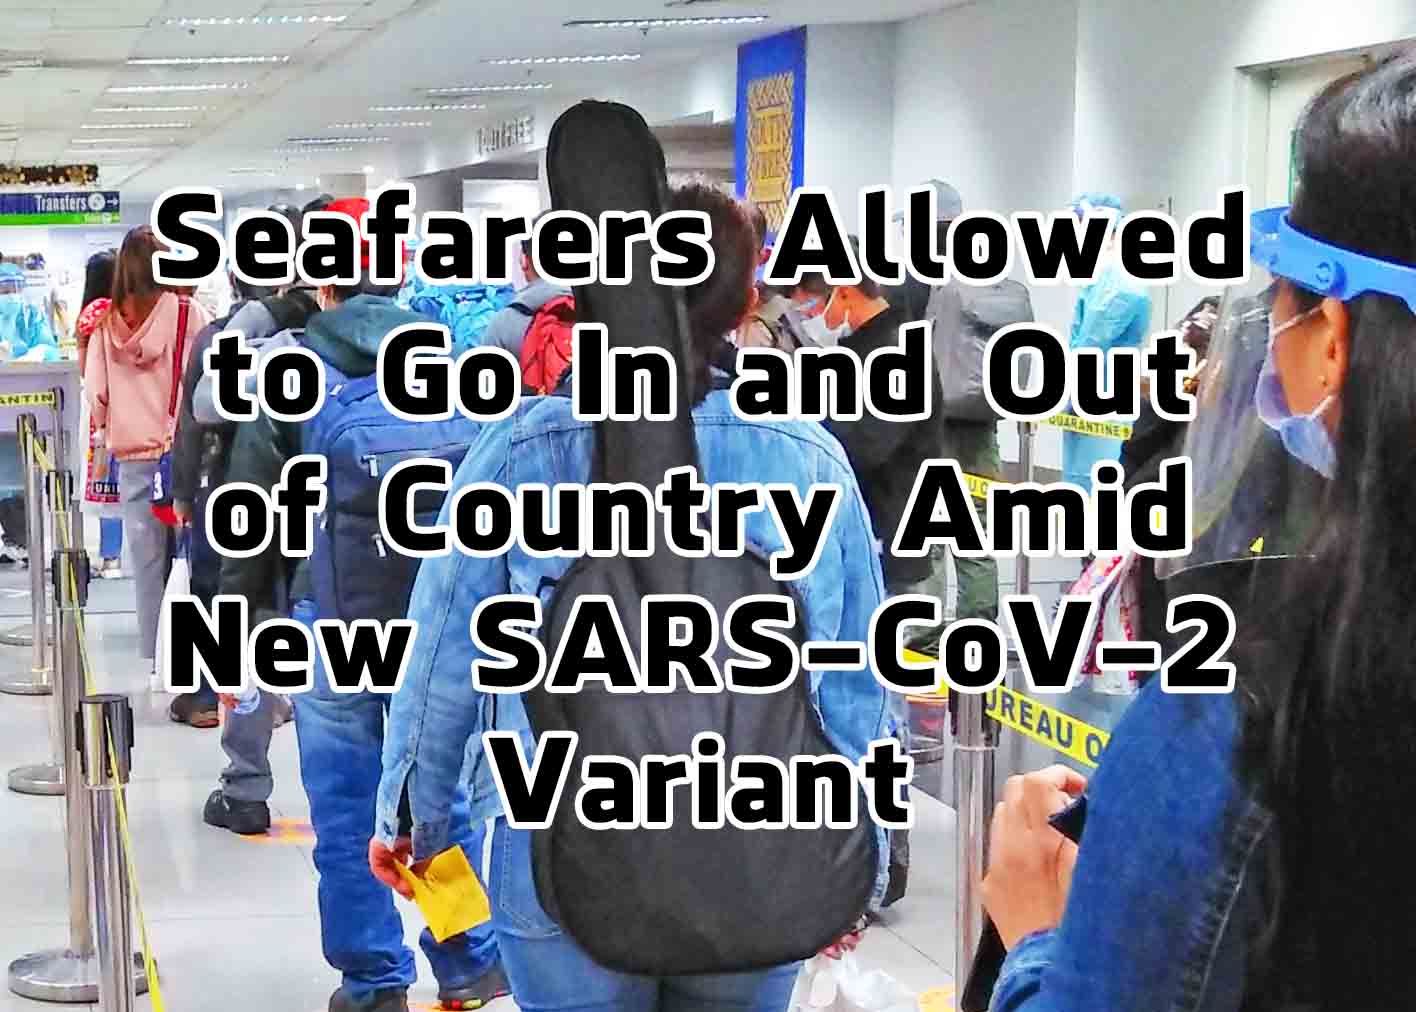 Cover image for the article, "Seafarers Allowed to Go In and Out of Country Amid New SARS-CoV-2 Variant" showing travelers in the airport wearing coronavirus PPE.